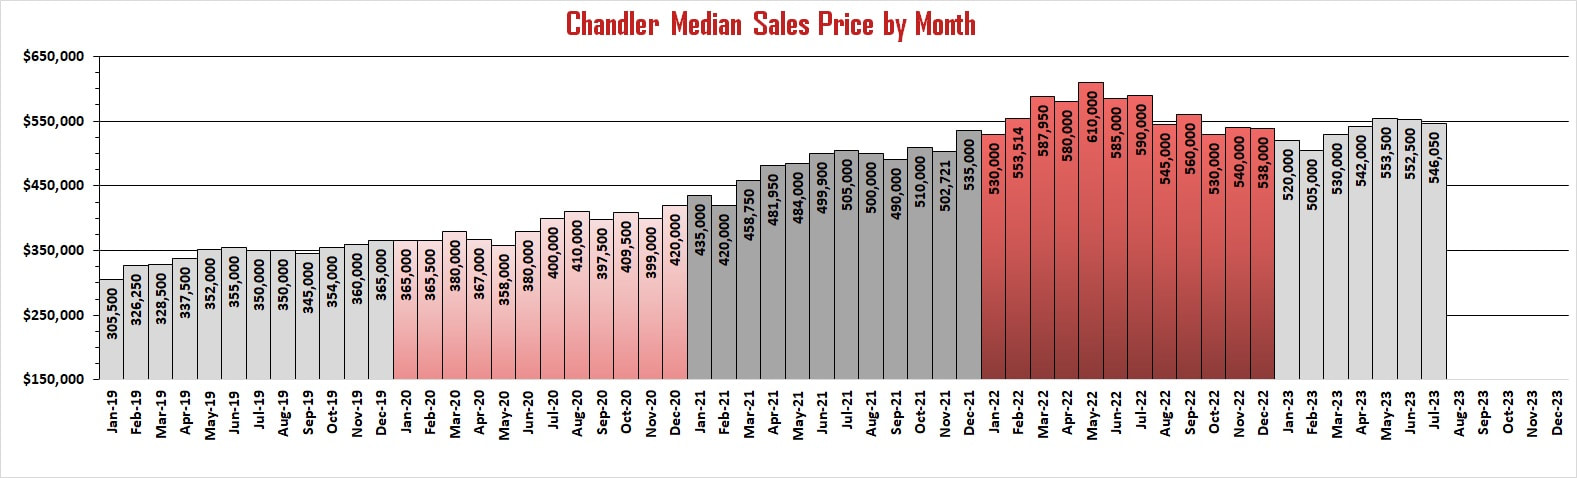 Chandler Market Reports - Median Sales Price by Month | Troy Erickson Realtor